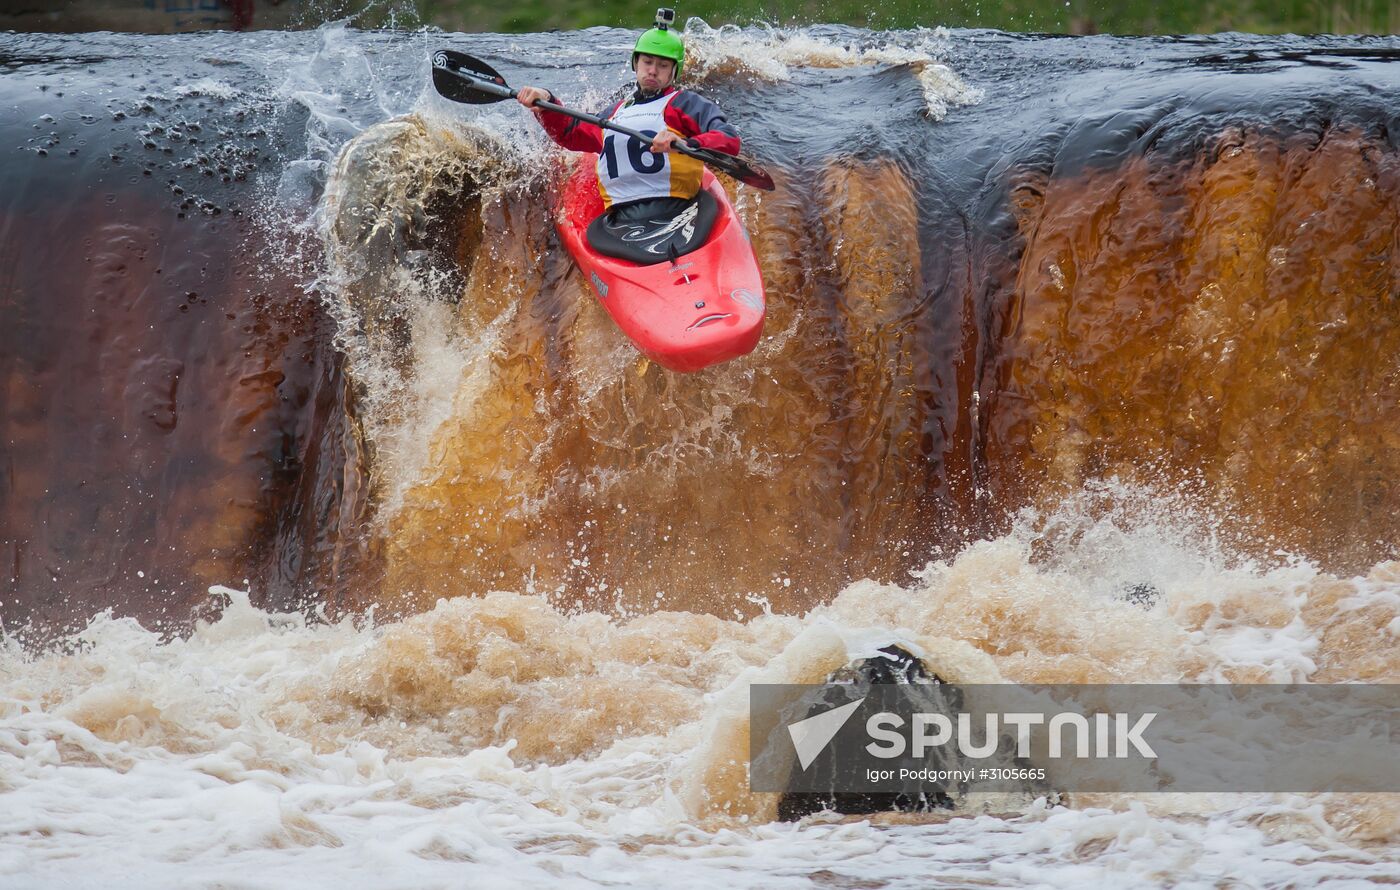 Mad Boat 2017 extreme kayaking Baltic Cup event in Petrozavodsk